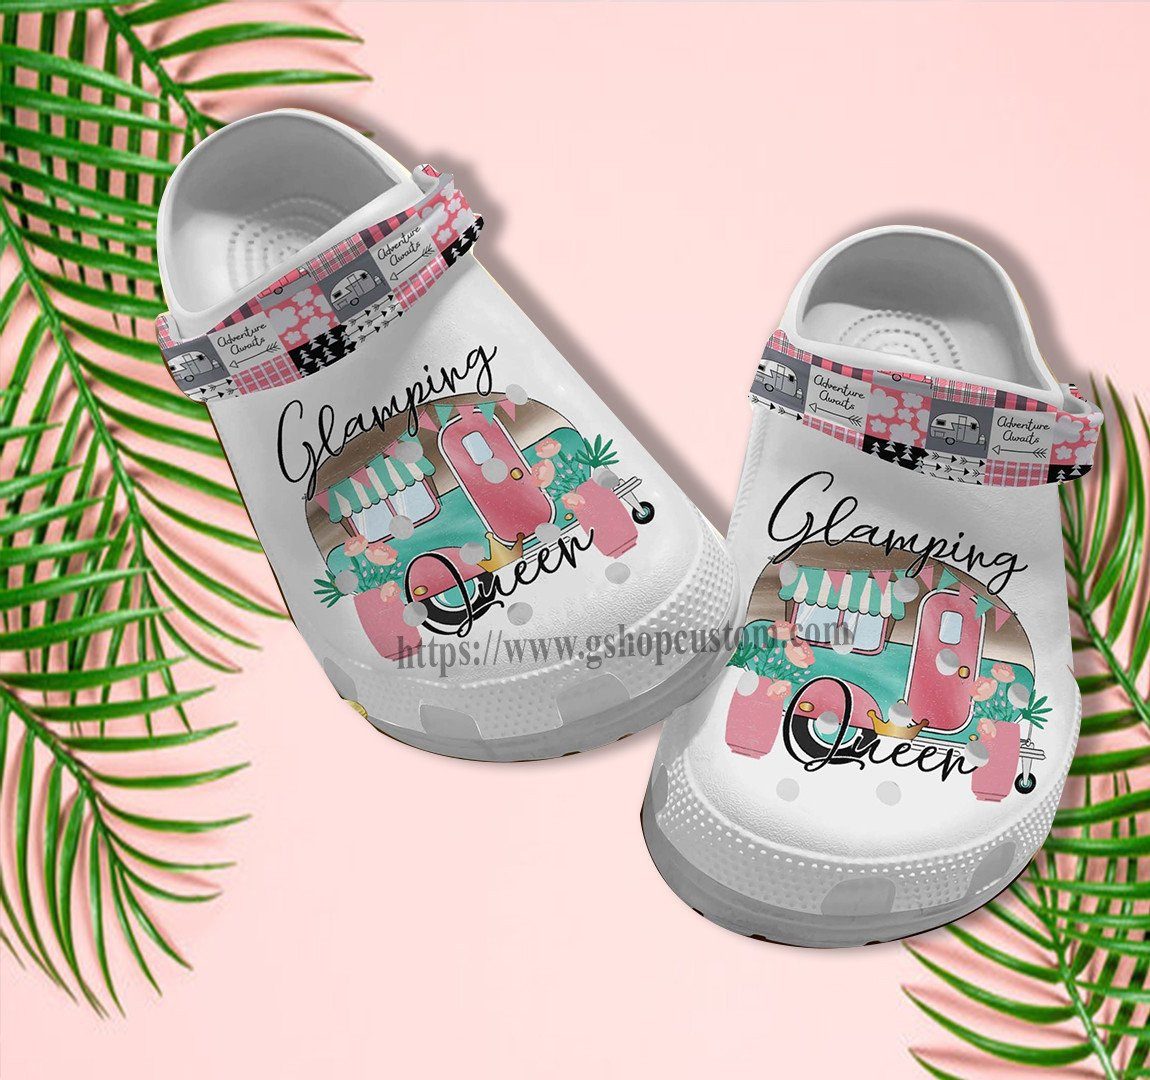 Camping Queen Cute Croc Shoes Gift Grandaughter- Camping Bus Pinky Shoes Croc Clogs Gift Niece